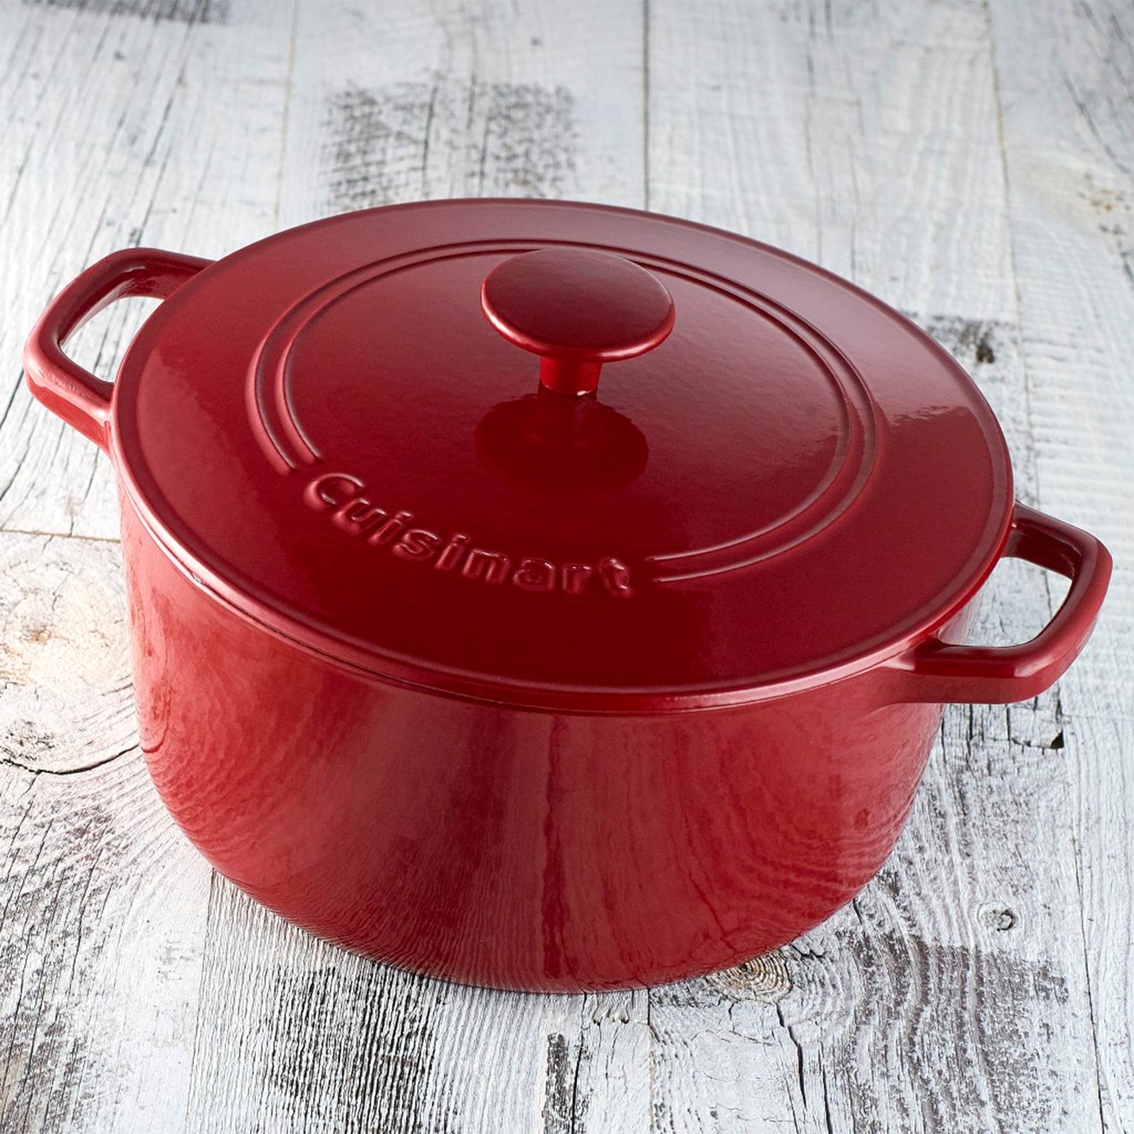 Cuisinart Chef's Classic Enameled Cast Iron 5-Quart Round Caserole in Cardinal Red - Image 3 of 4